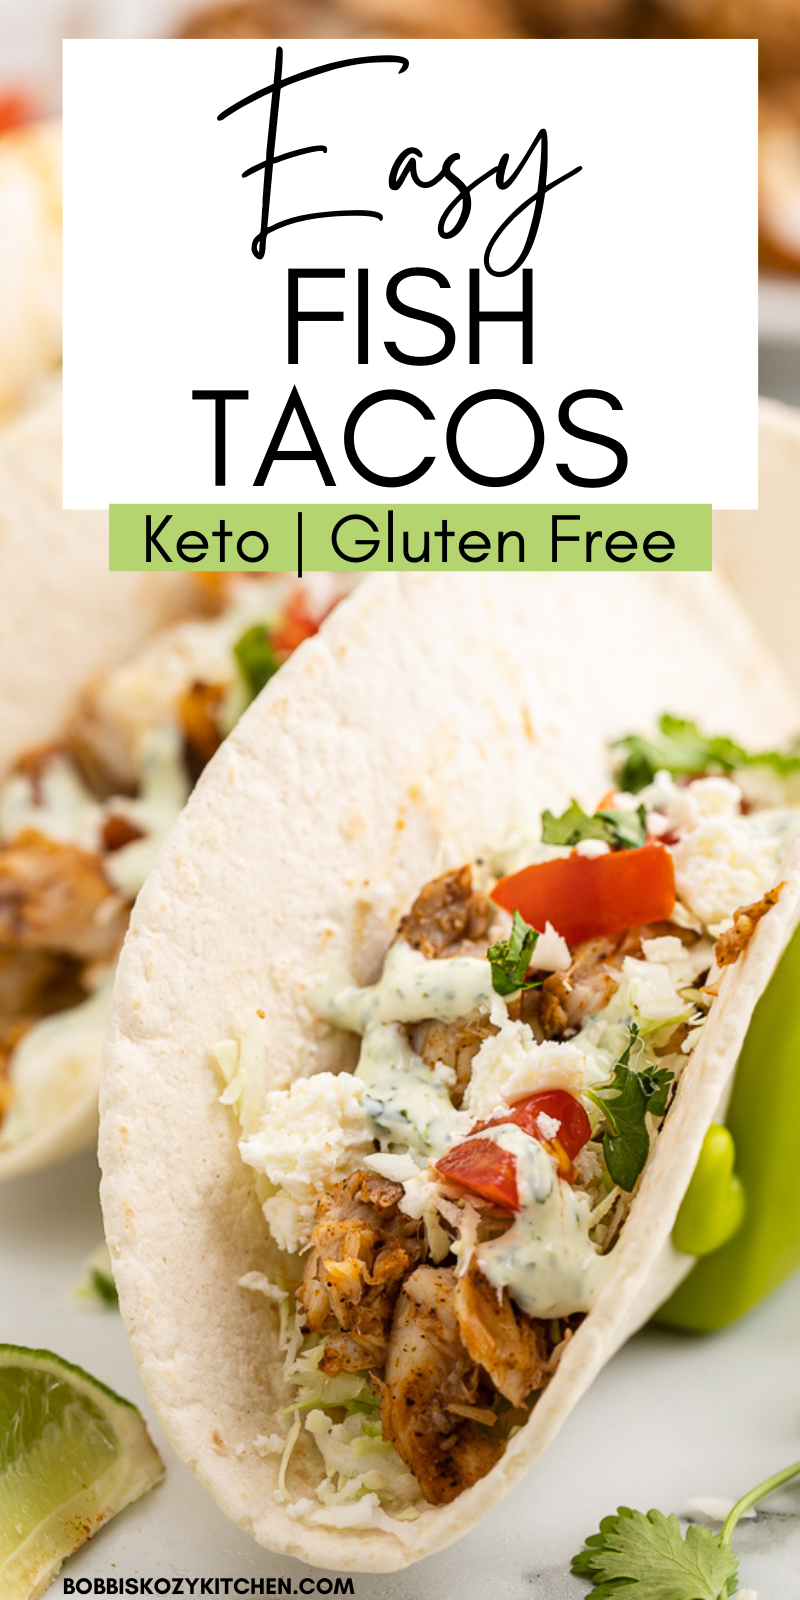 Keto Fish Tacos - Turn your Taco Tuesday into a fiesta with these easy to make Keto Fish Tacos. They are low carb, gluten-free, and less than 3 net carbs per taco! #keto #lowcarb #glutenfree #fish #tacos #easy